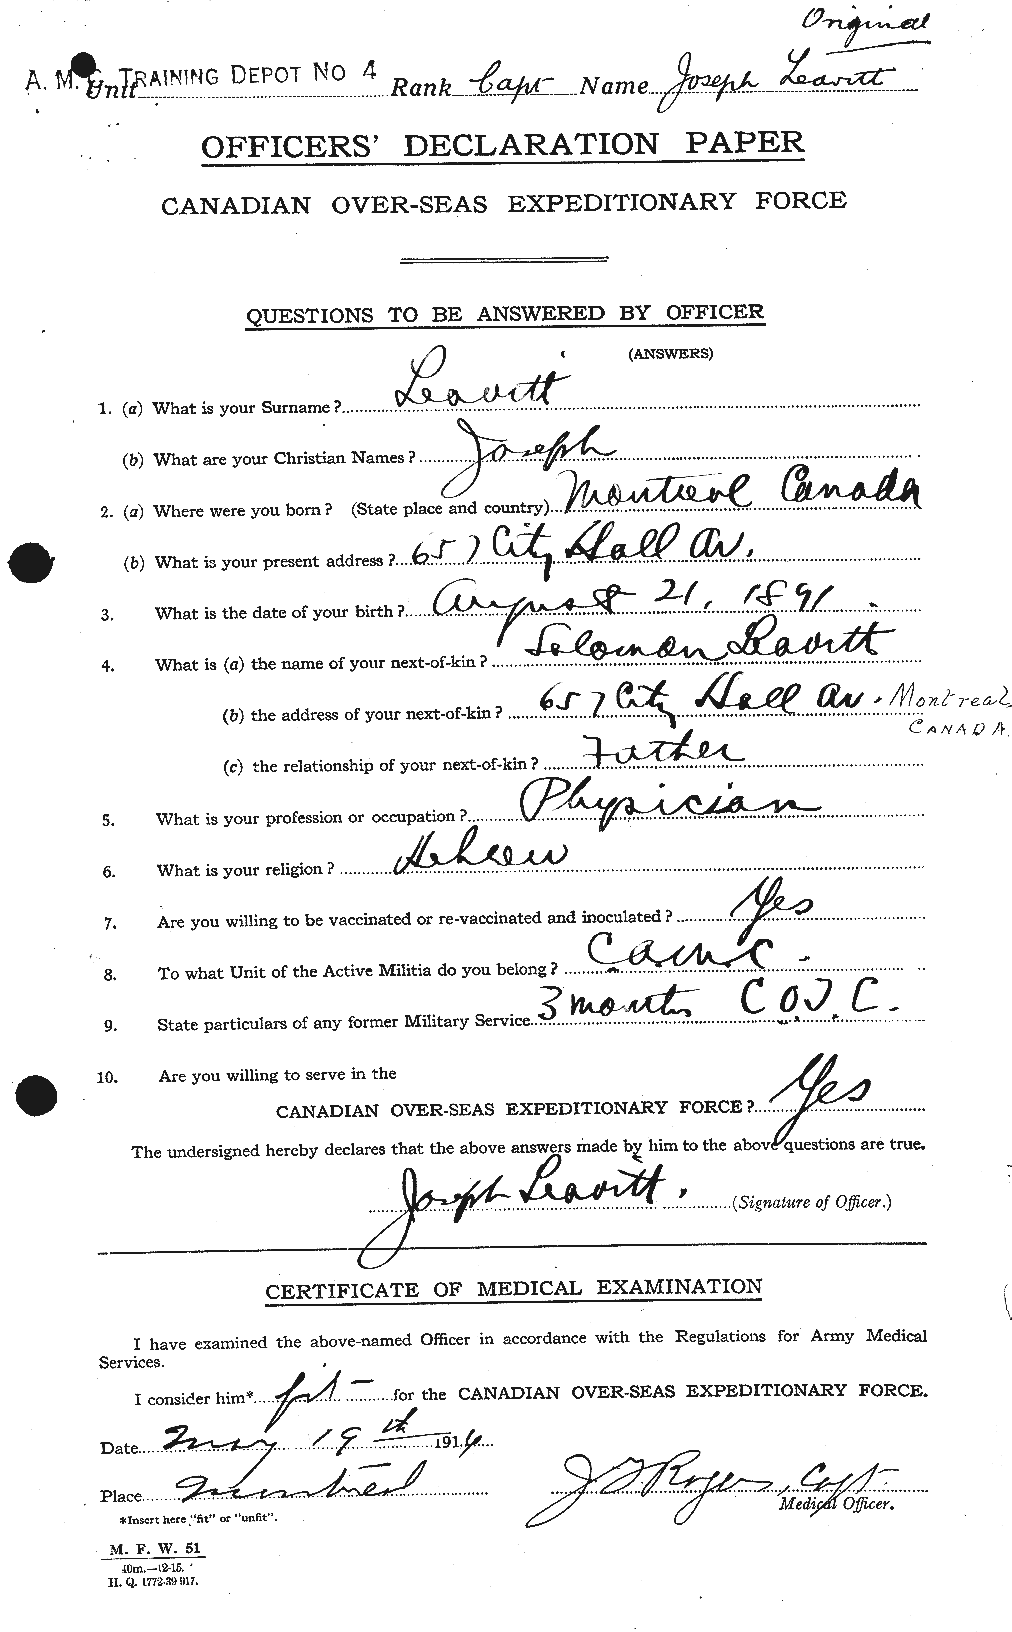 Personnel Records of the First World War - CEF 454324a